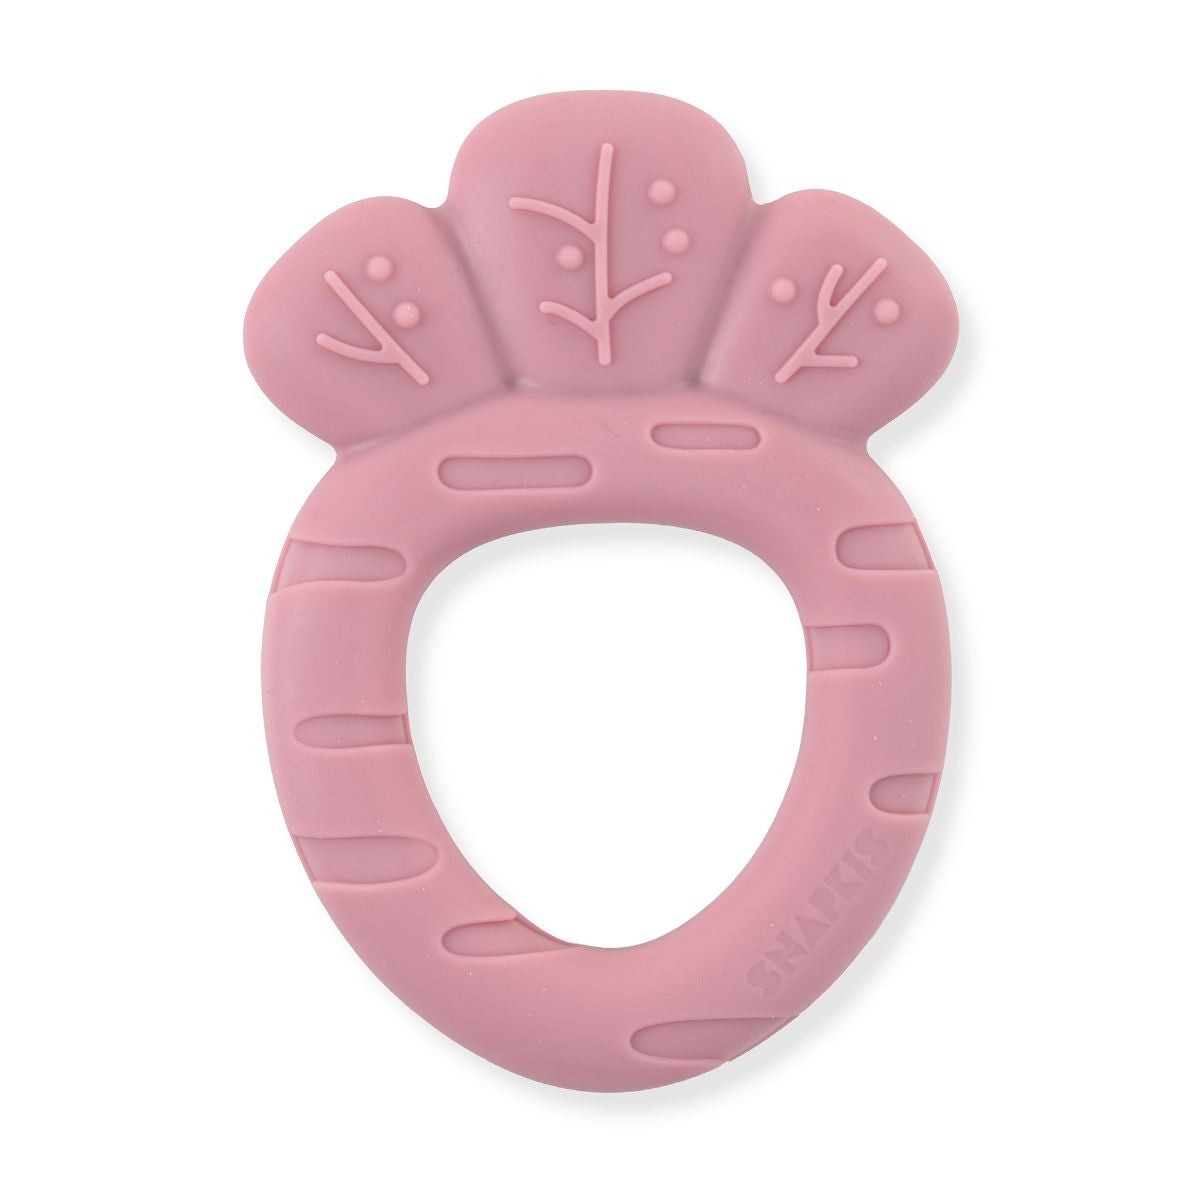 Snapkis Carrot Silicone Teether - Assorted Colours